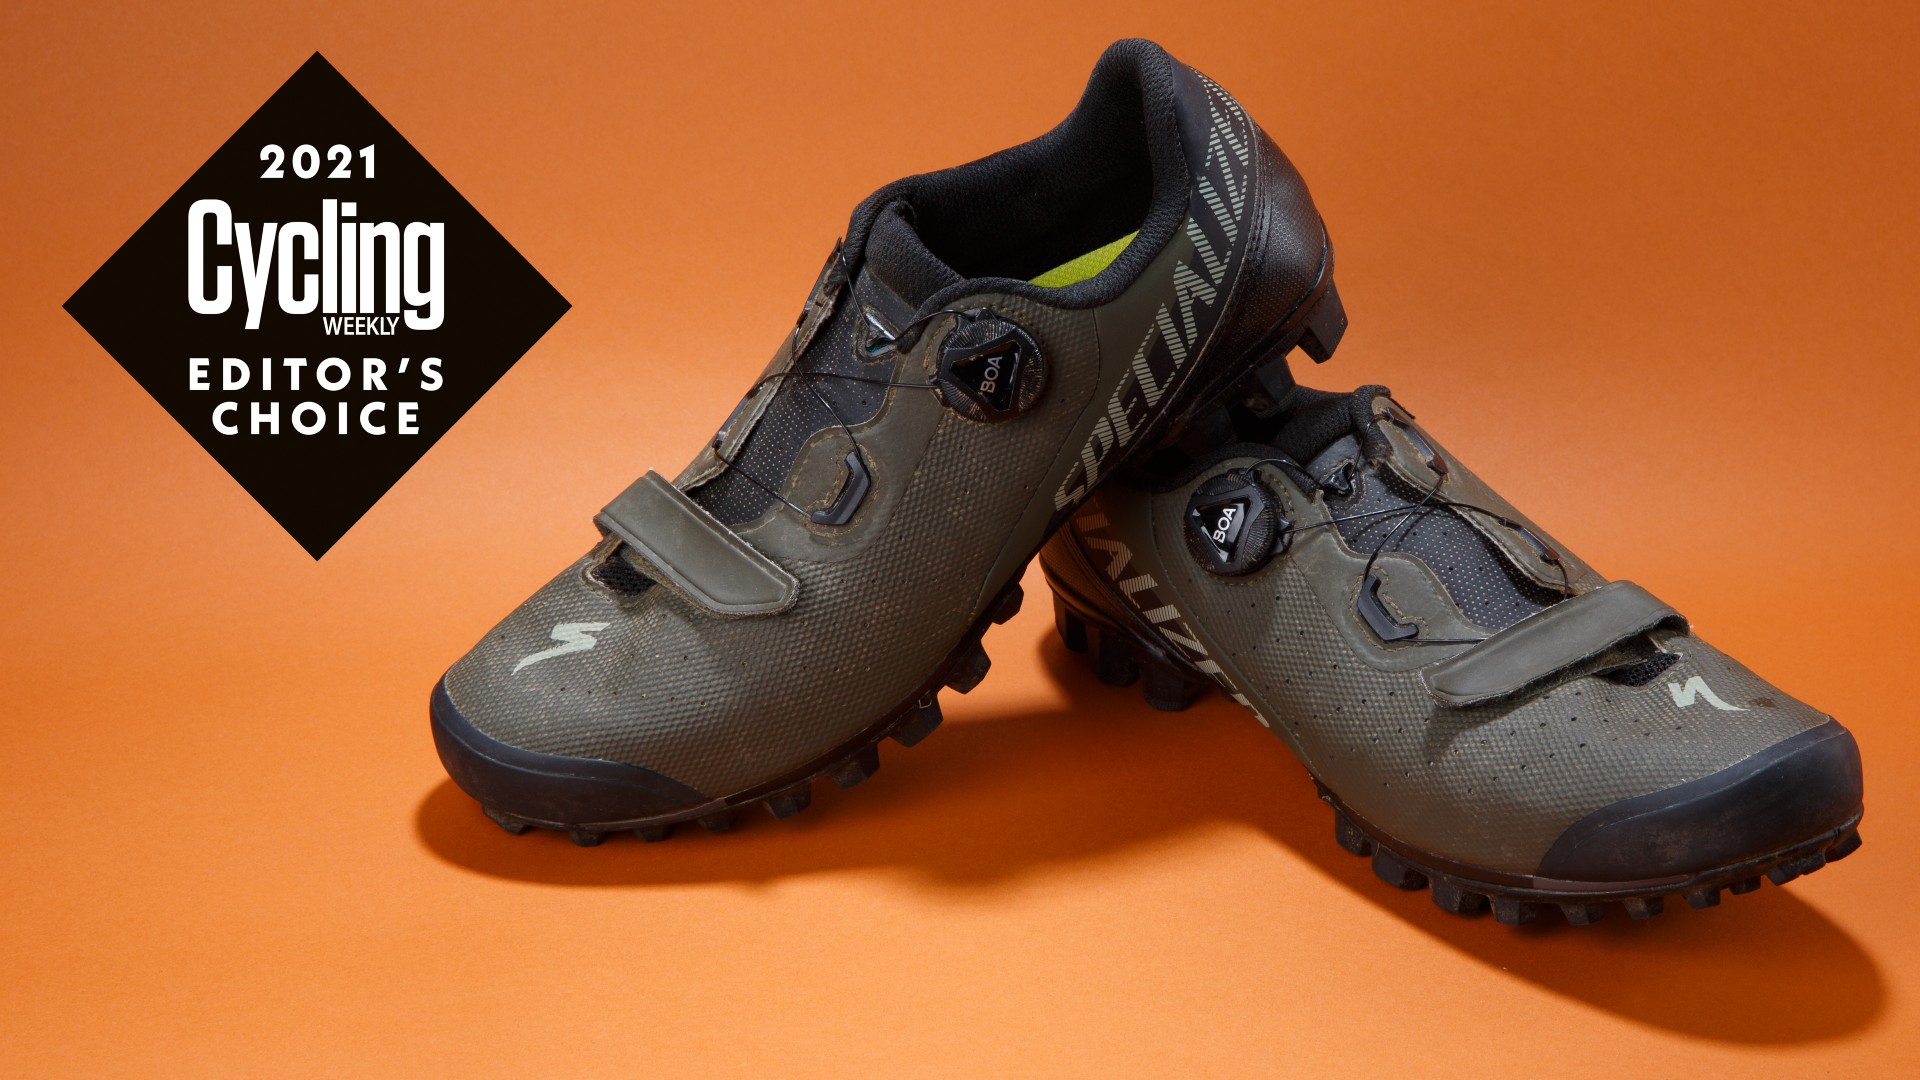 Pirate Contaminated World window Specialized Recon 2.0 Shoes review | Cycling Weekly